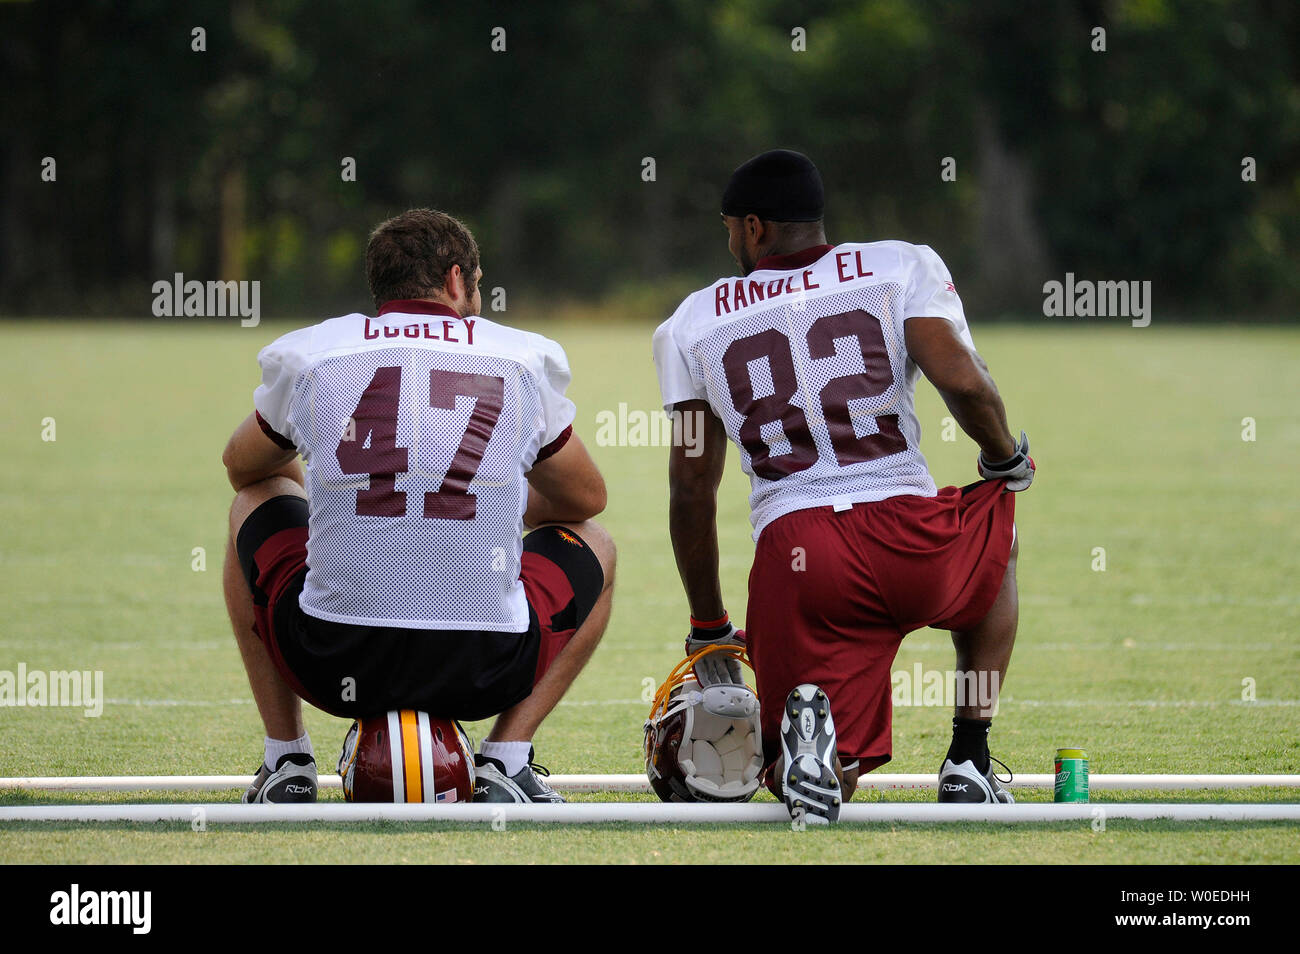 Washington Redskins tight end Chris Cooley (47) and wide receiver Antwaan Randle El sit on the sideline during the teams first day of training camp at Redskins Park in Ashburn, Virginia on July 20, 2008. (UPI Photo/Kevin Dietsch) Stock Photo